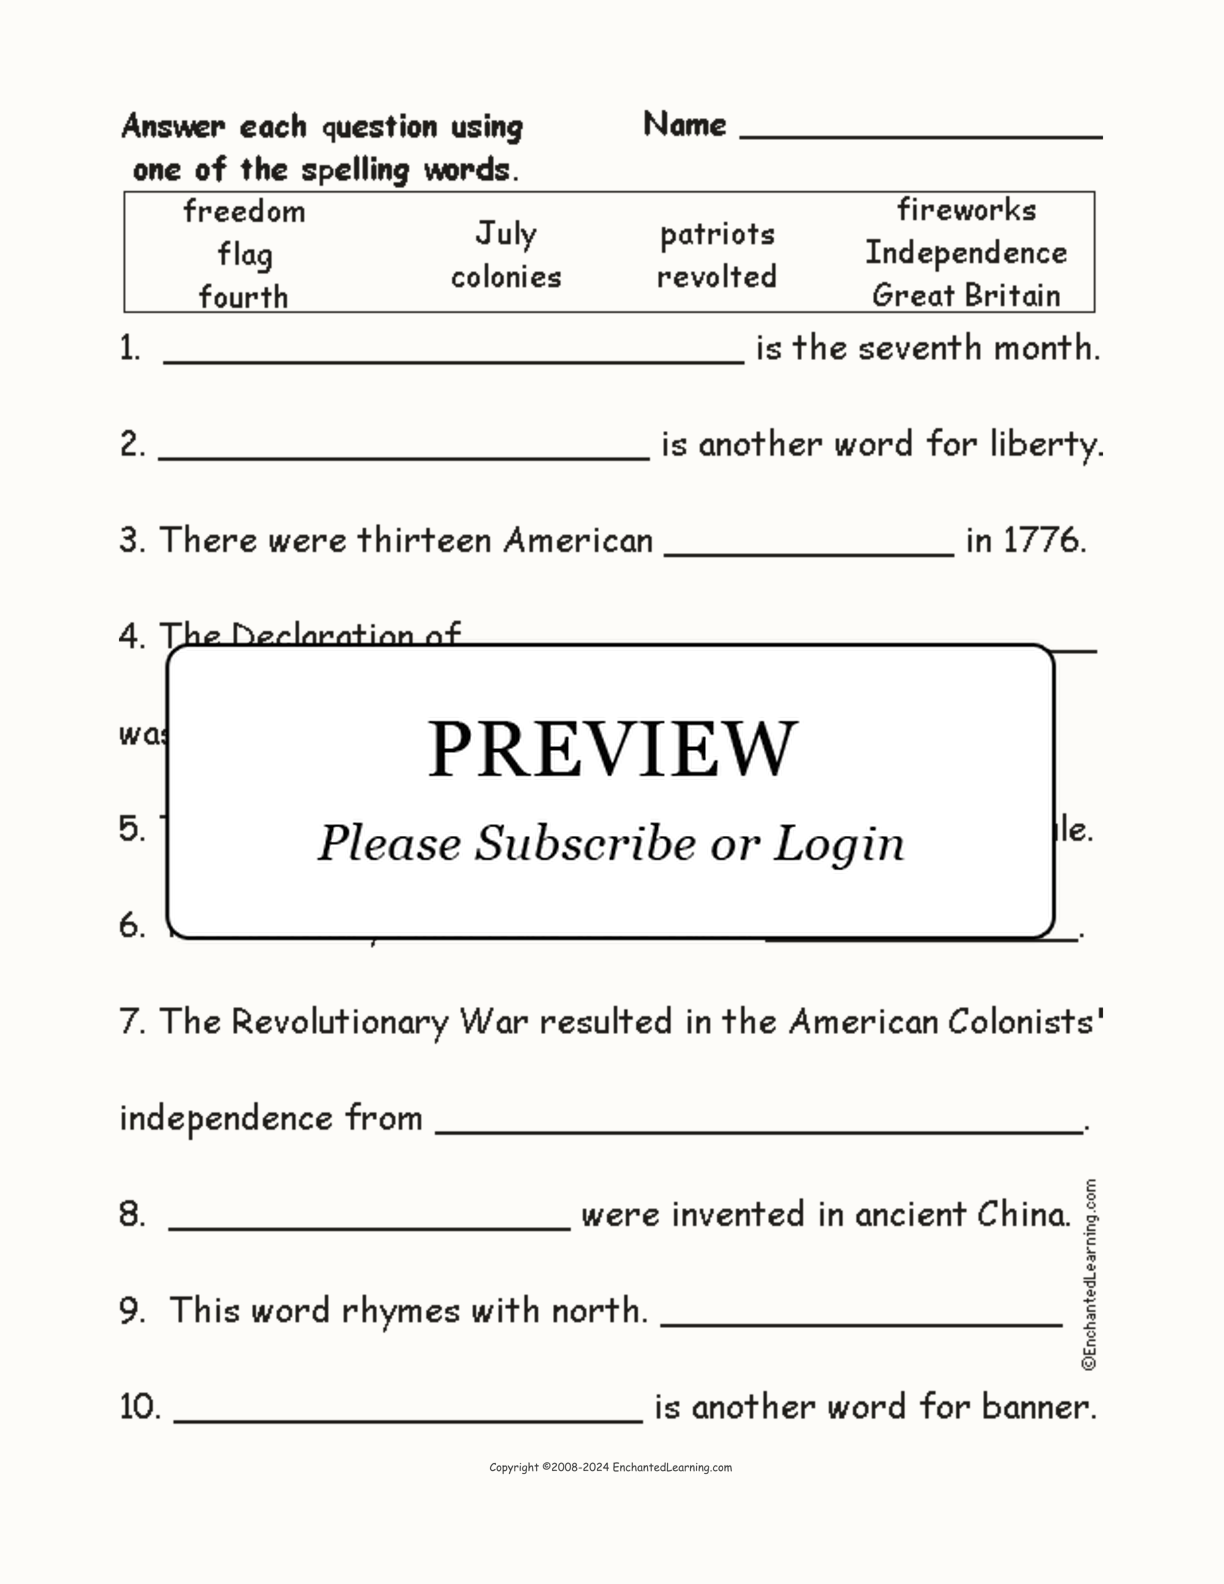 July 4th: Spelling Word Questions interactive worksheet page 1